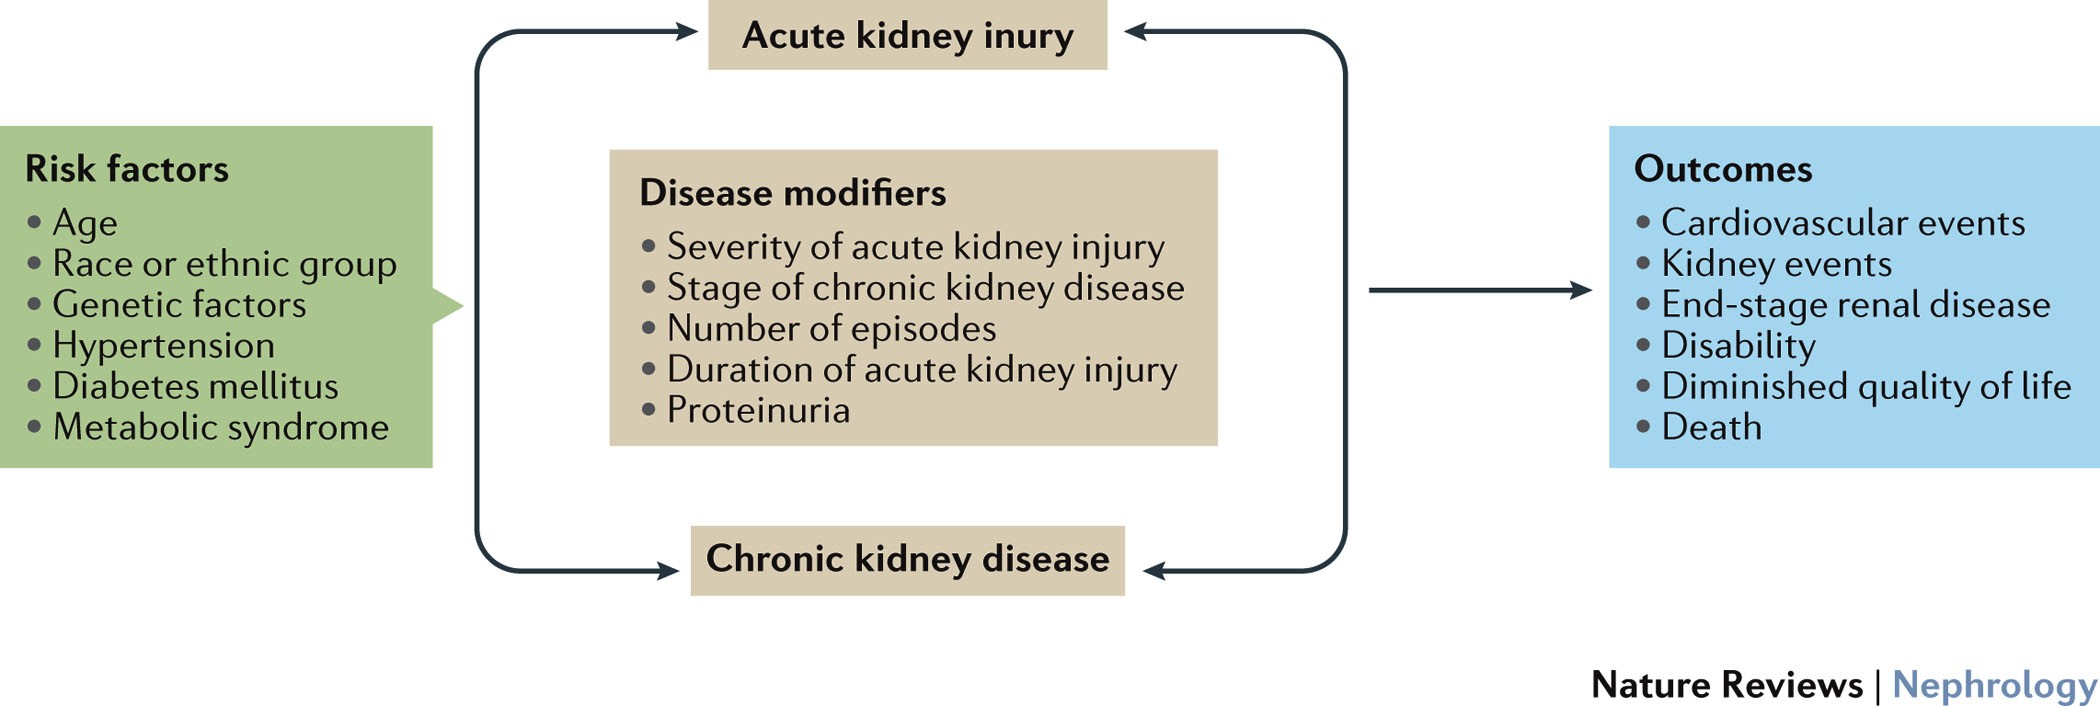 Acute kidney disease and renal recovery: consensus report of the Acute  Disease Quality Initiative (ADQI) 16 Workgroup | Nature Reviews Nephrology